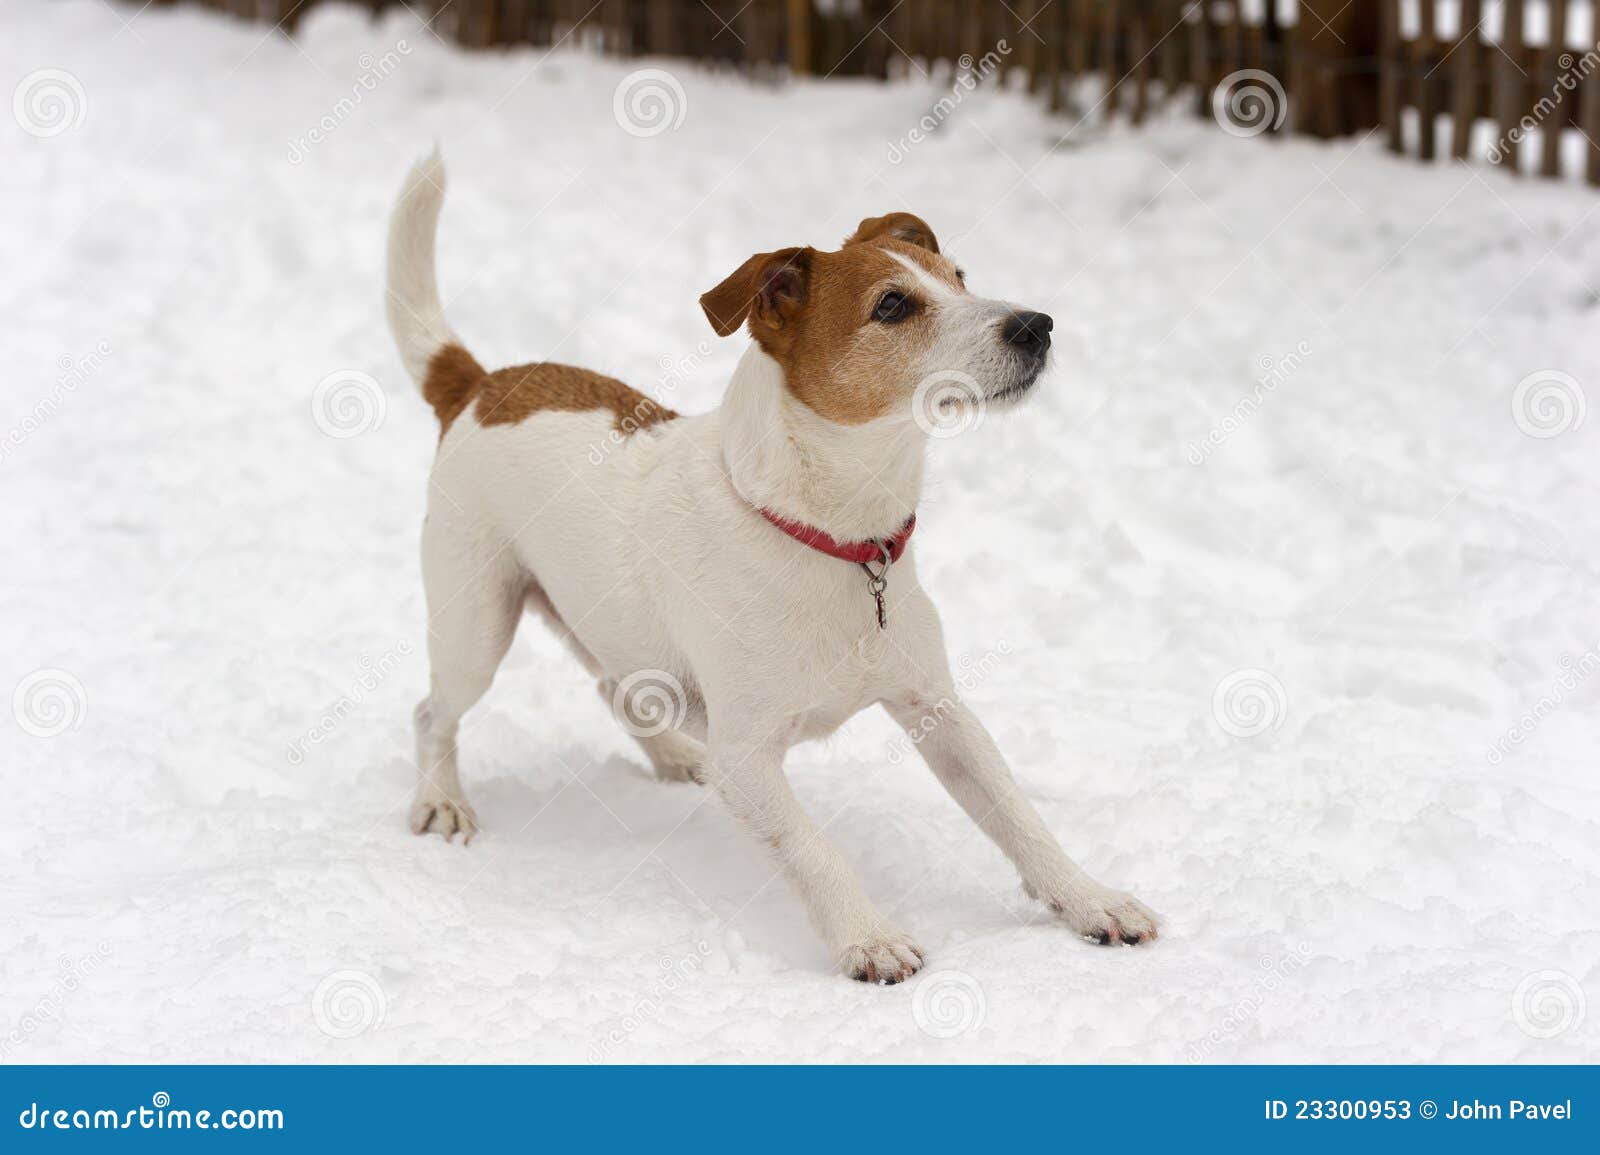 parson jack russell terrier ready to play